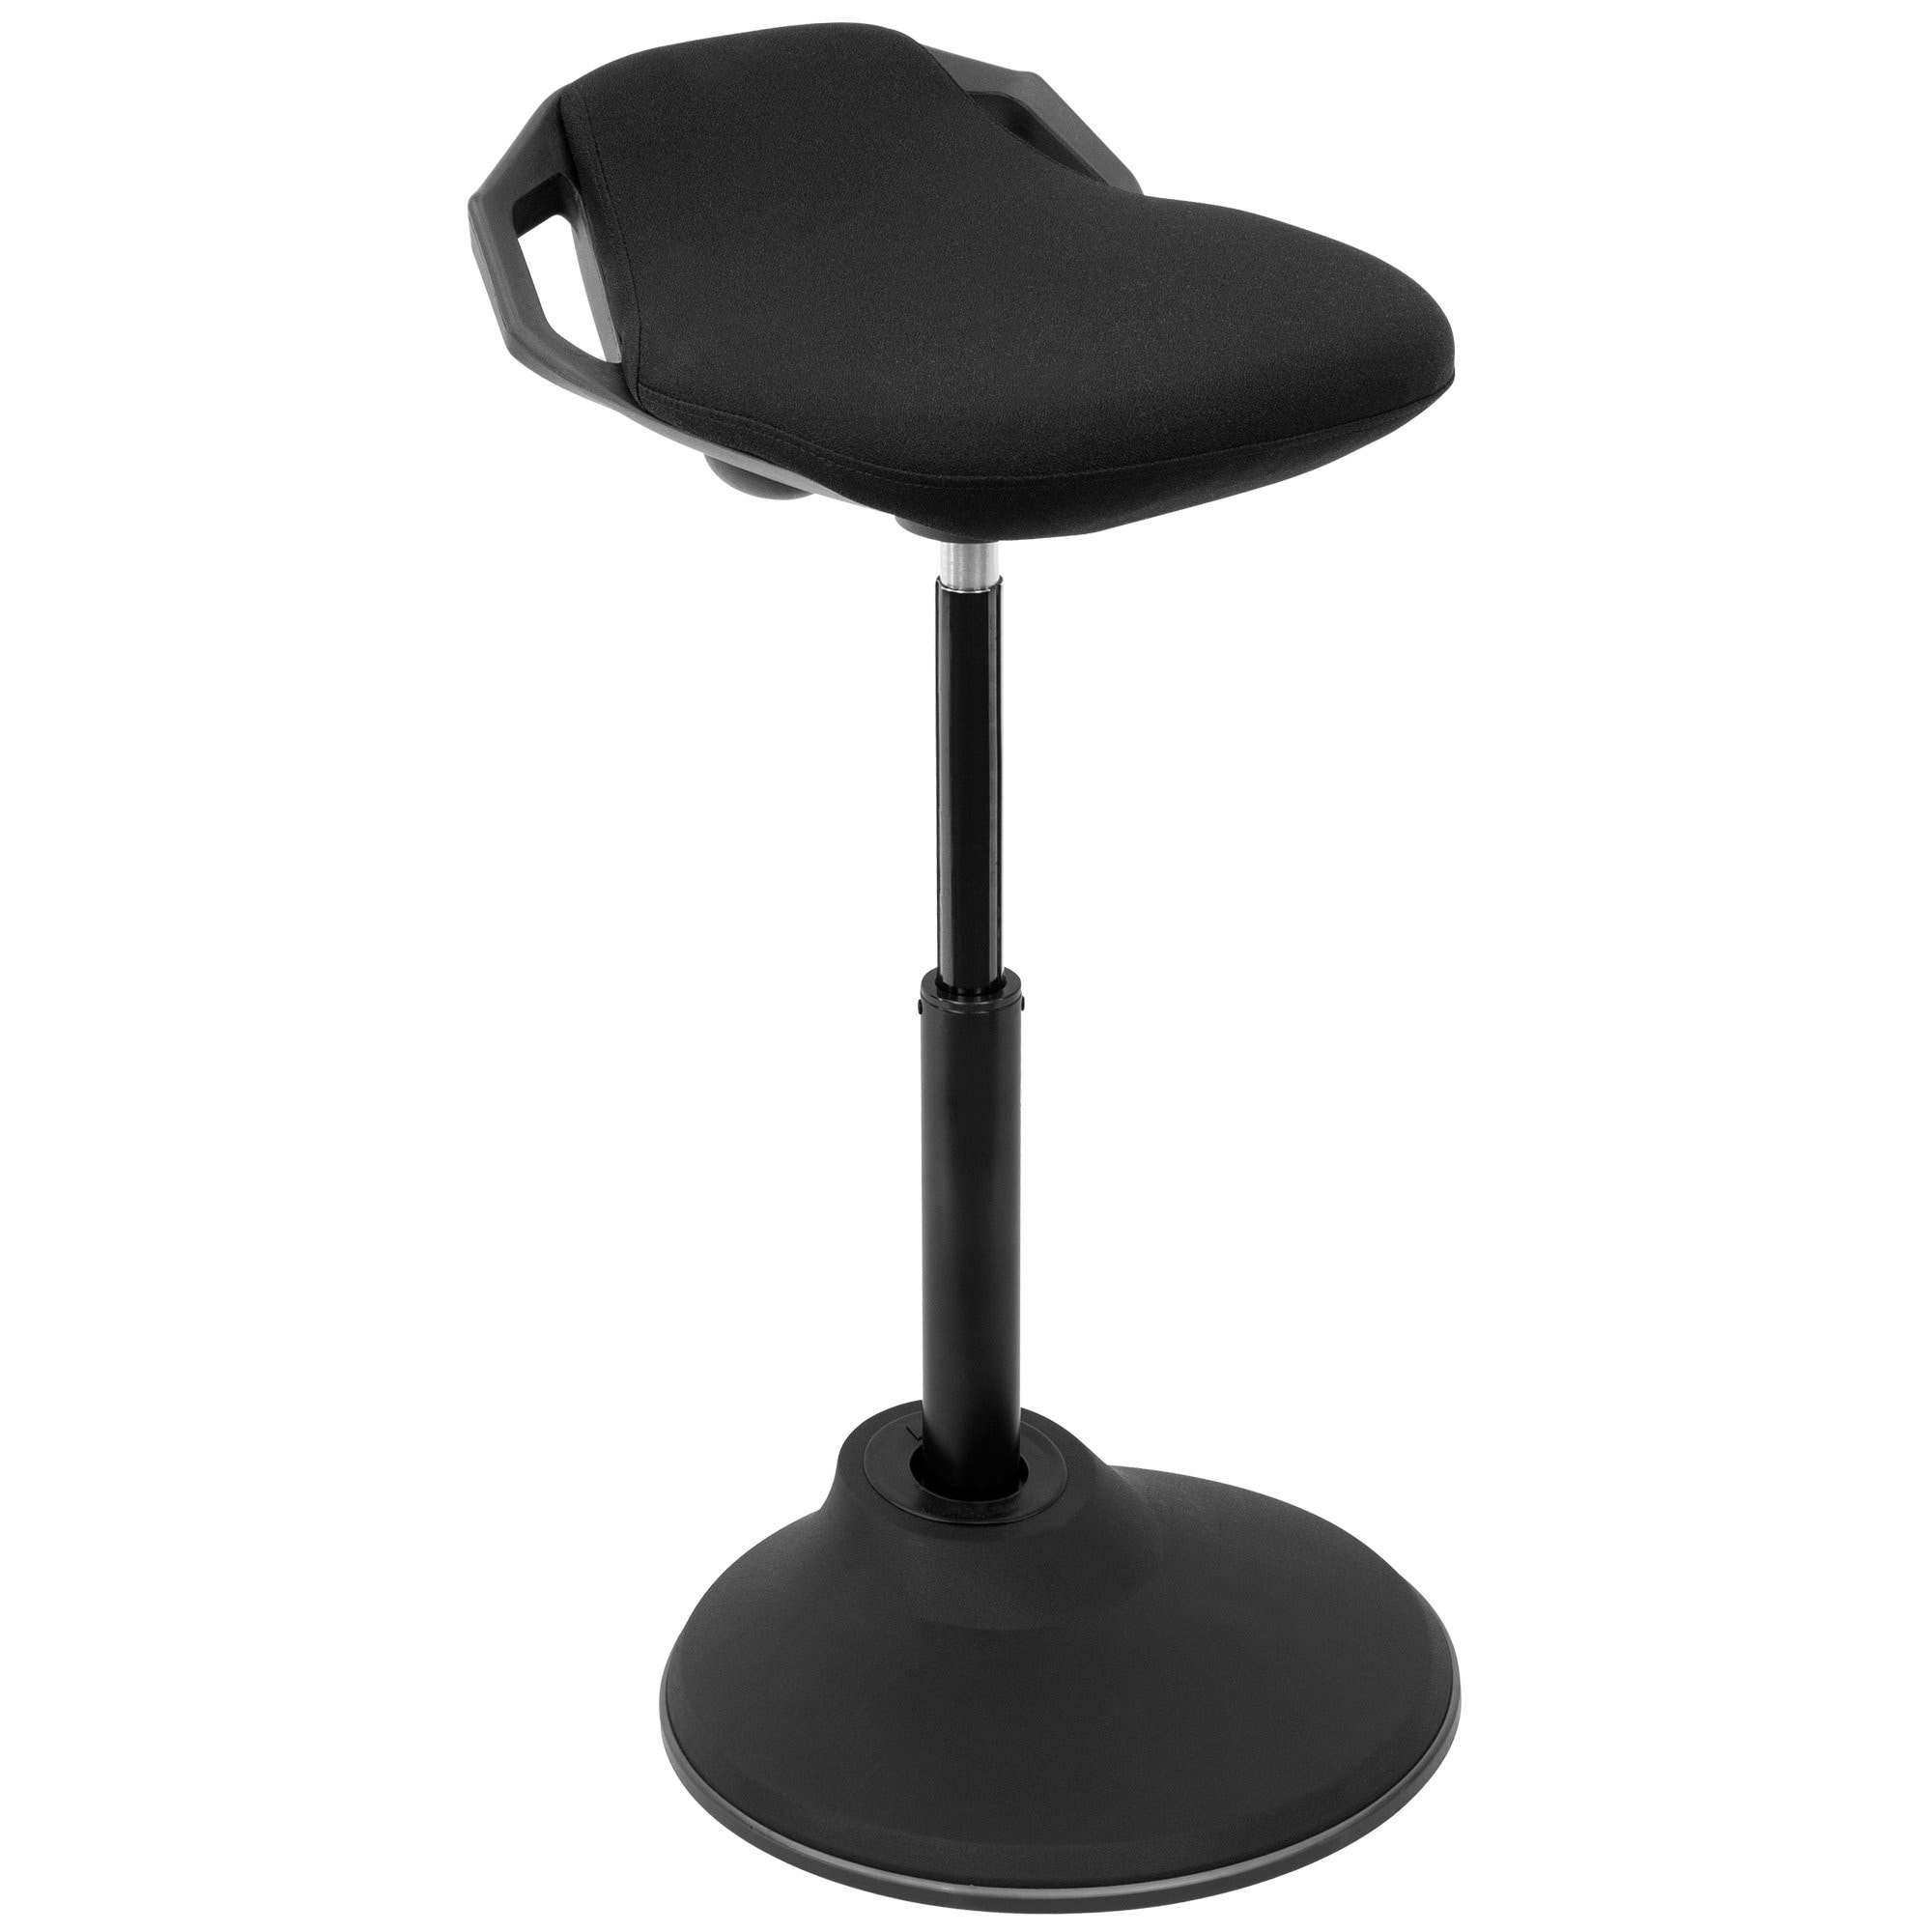 https://ak1.ostkcdn.com/images/products/is/images/direct/794b49397f7c6d5c12e0e193f802475a4b4ff14c/Mount-It%21-Ergonomic-Sit-Stand-Stool-%5B360%C2%B0-Tilt%5D-Height-Adjustable%2C-Leaning-Chair-for-Standing-Desk.jpg